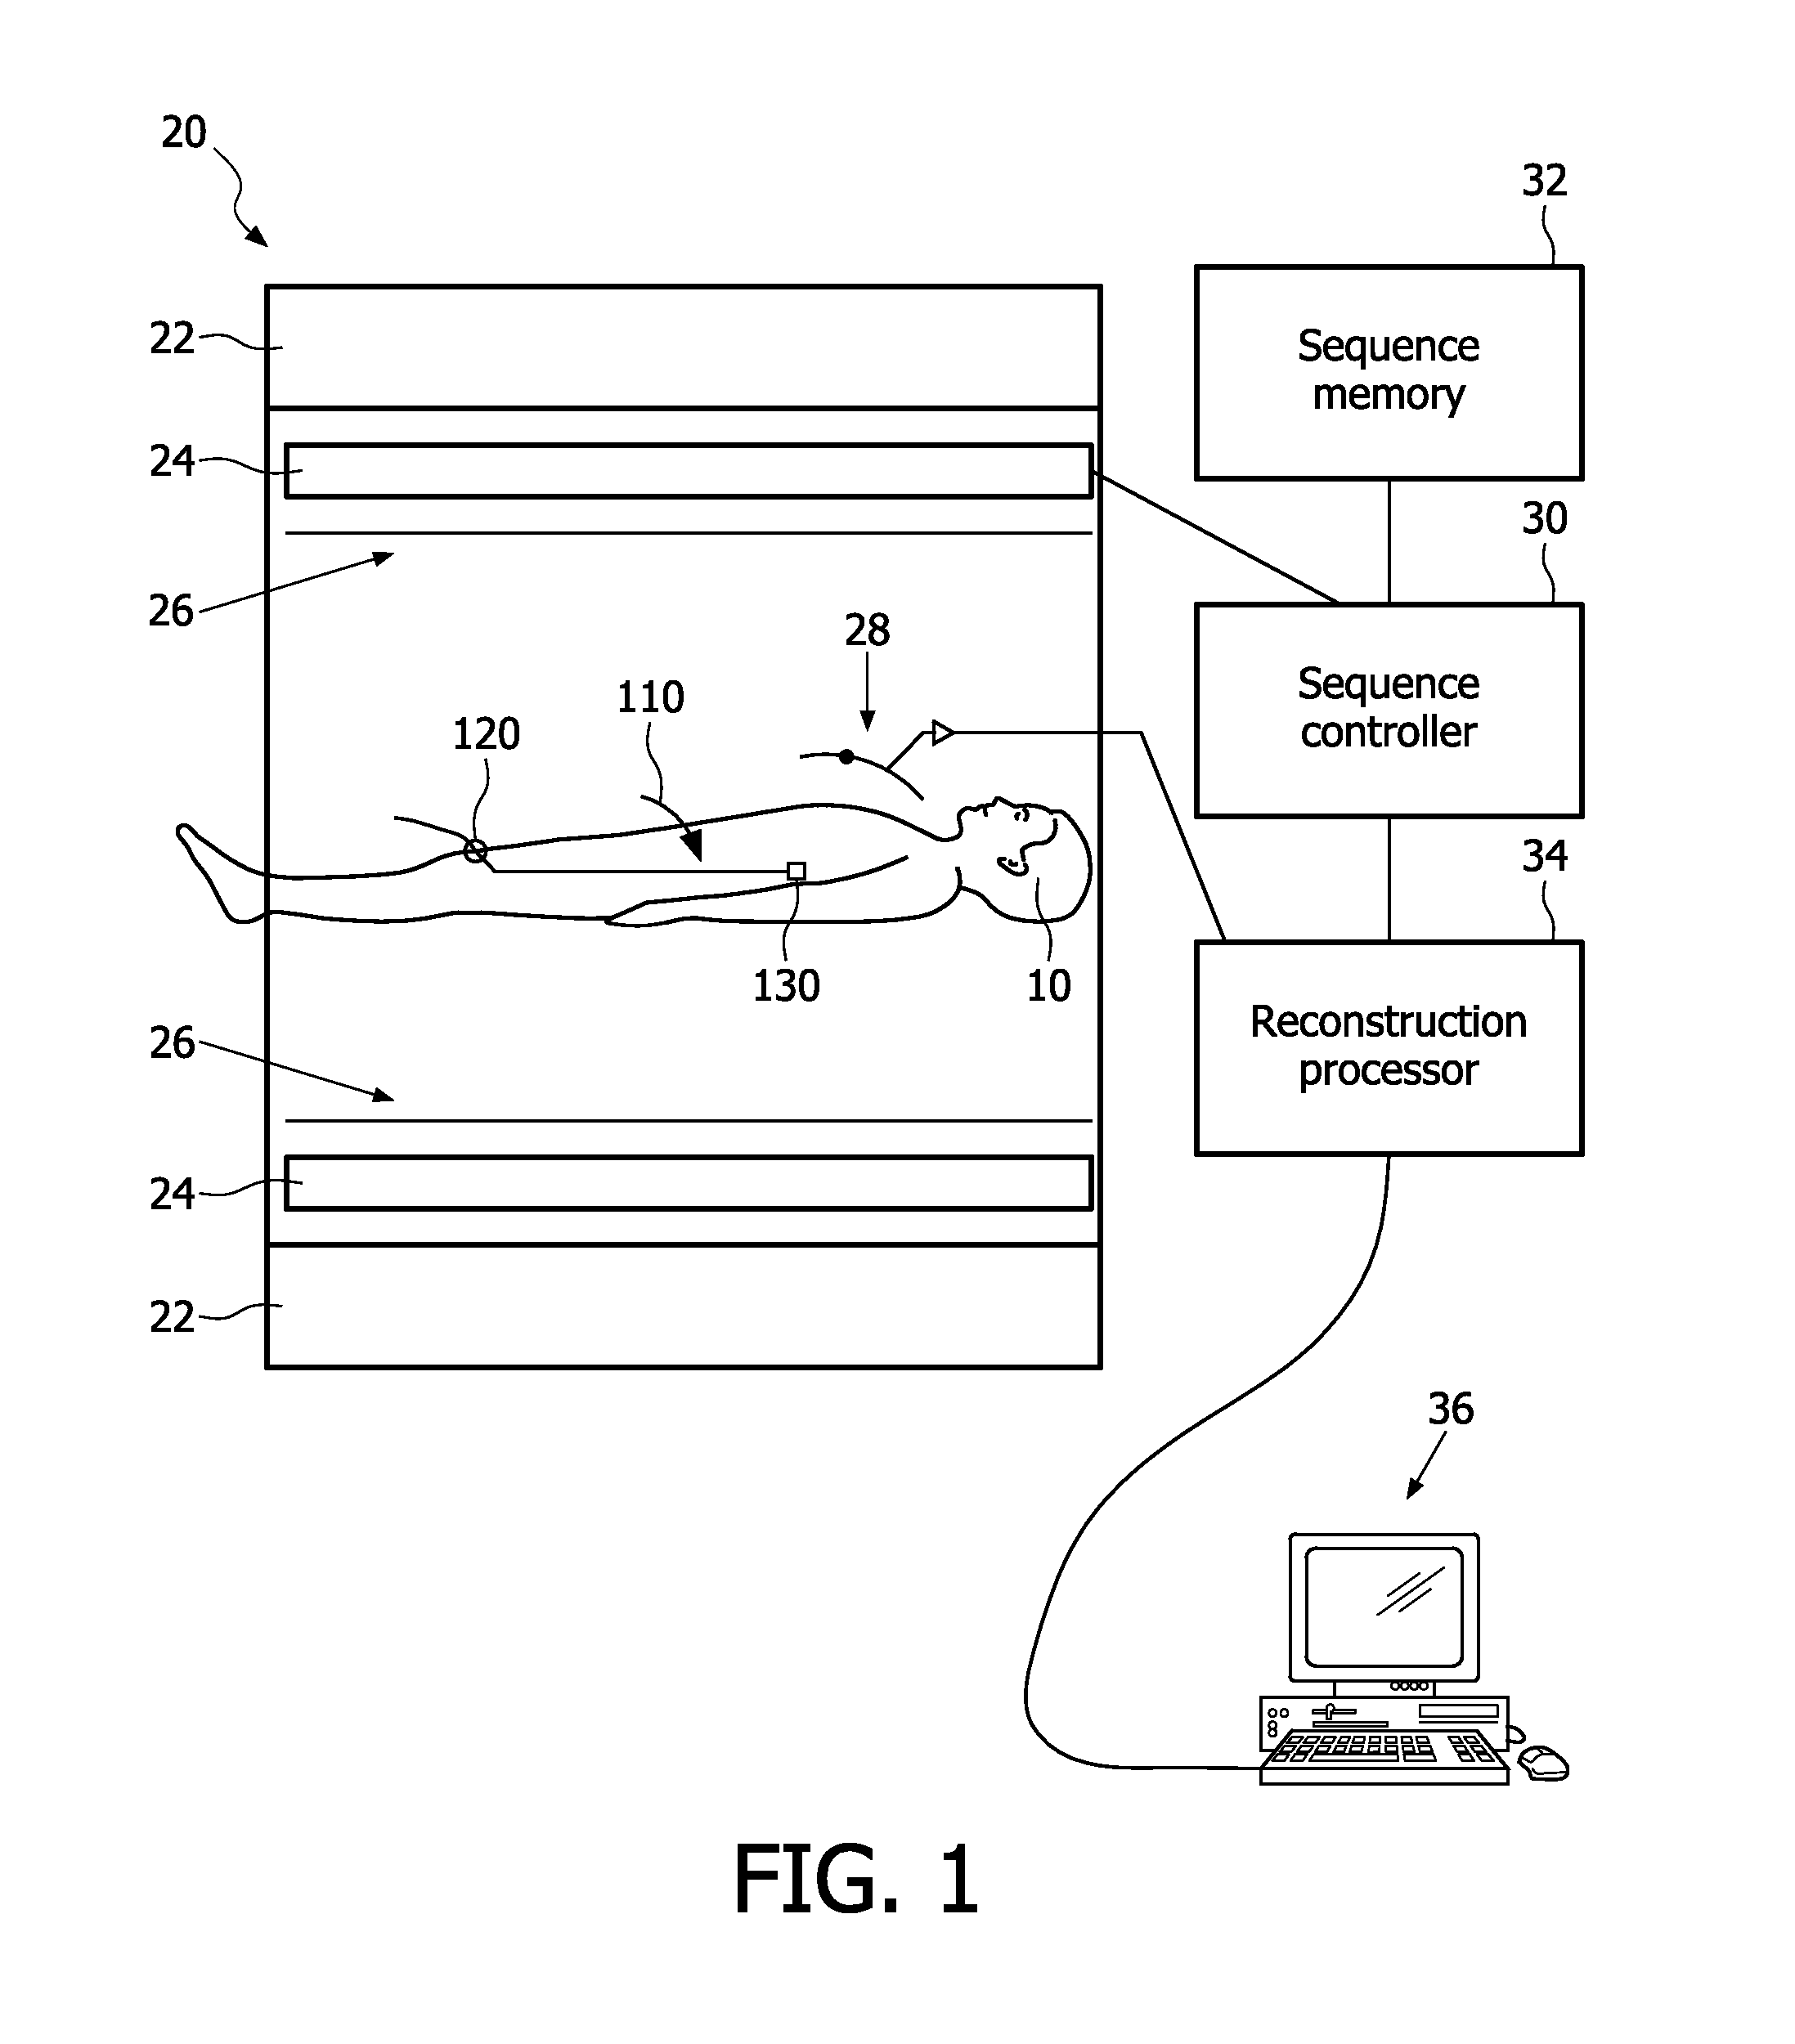 System, method and apparatus for cardiac intervention with mr stroke detection and treatment